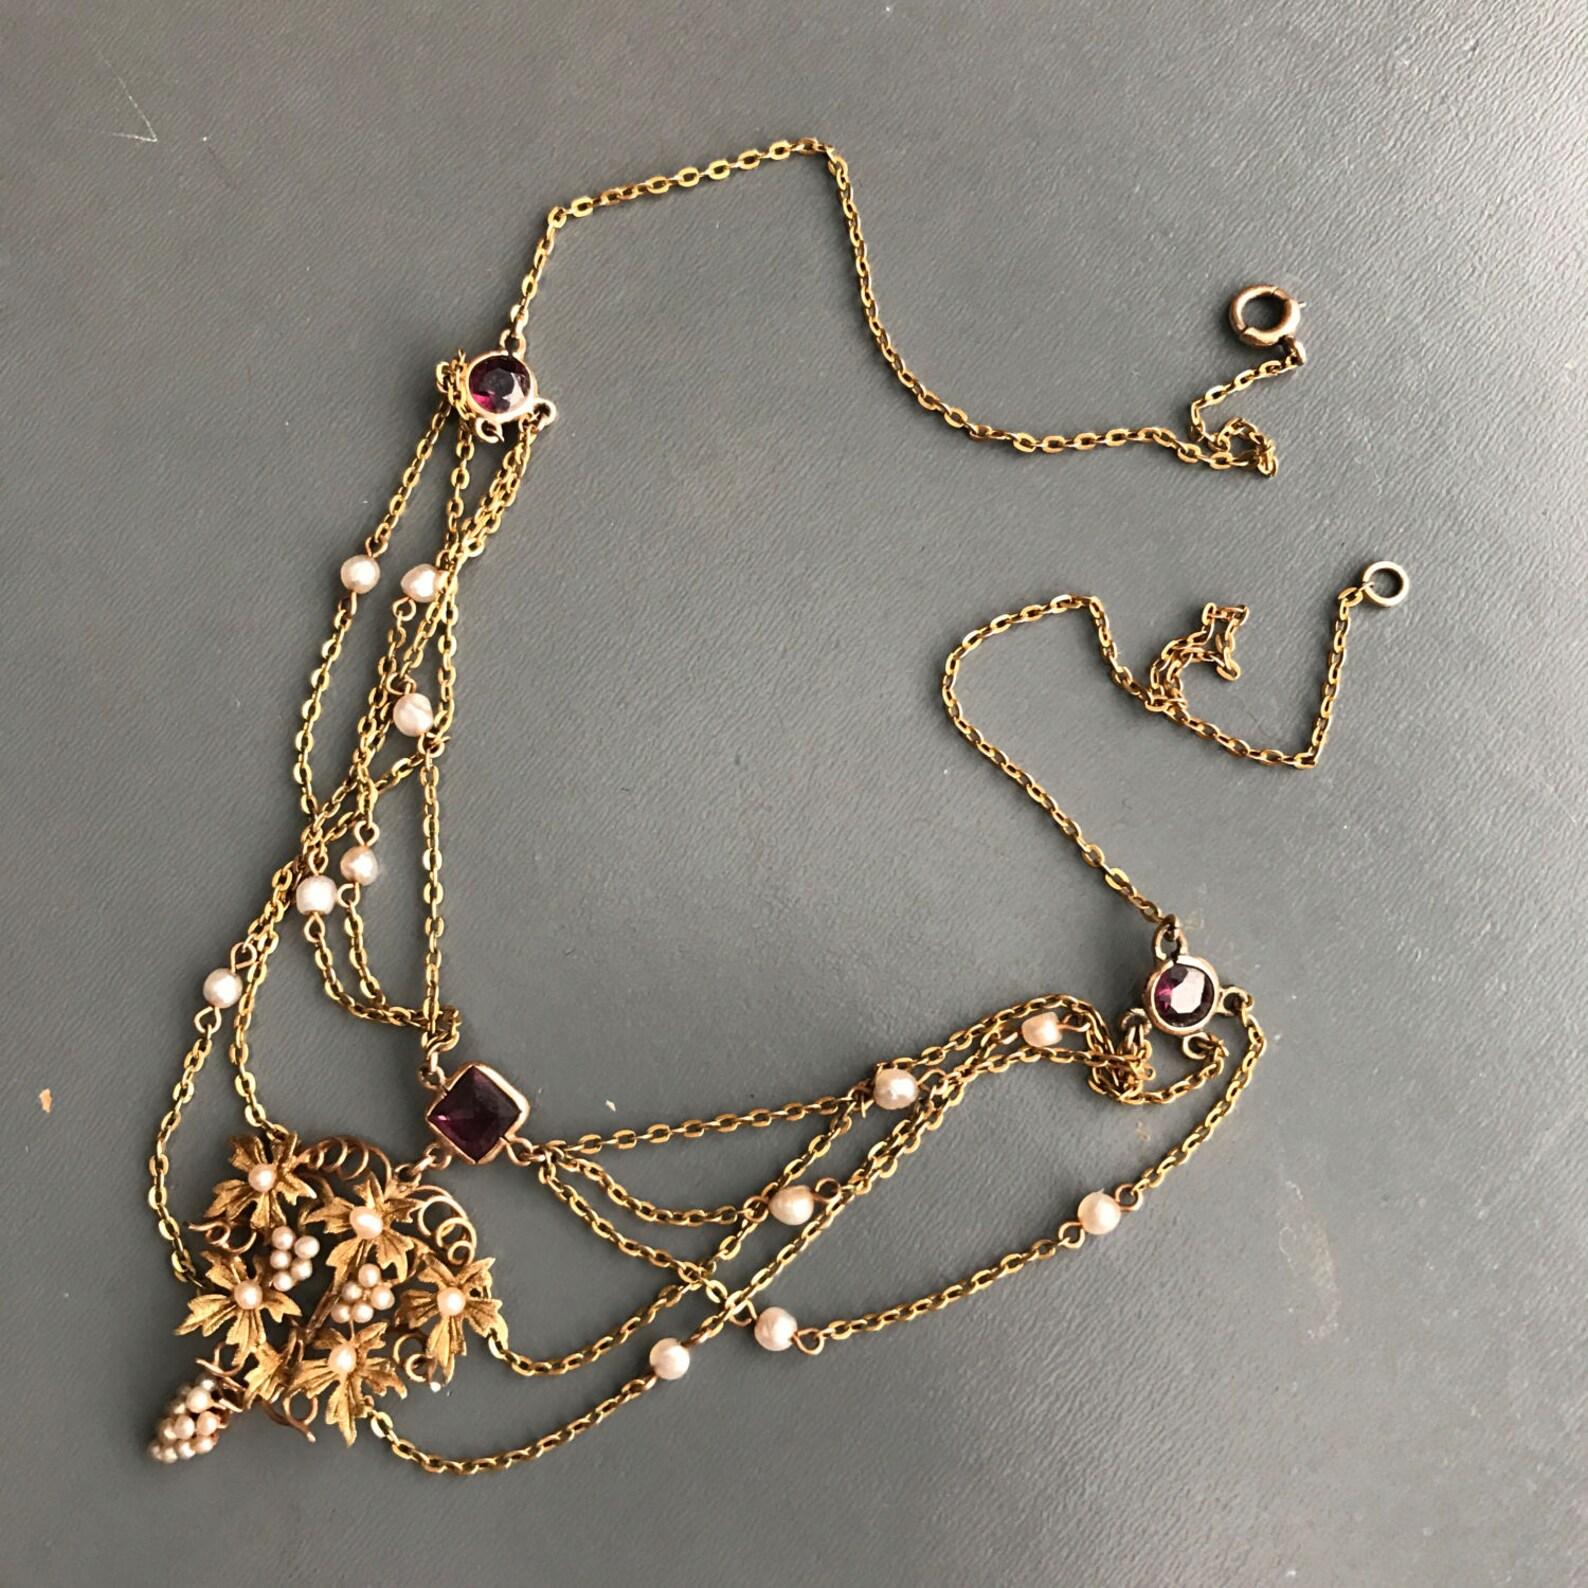 Antique Art nouveau swag necklace with 10kt gold and genuine seed pearls .
Central pendant features a detailed ..very finely done gold and seed pearls grape clusters surrounded by gold leaves , necklace ends with a circular spring clasp and 